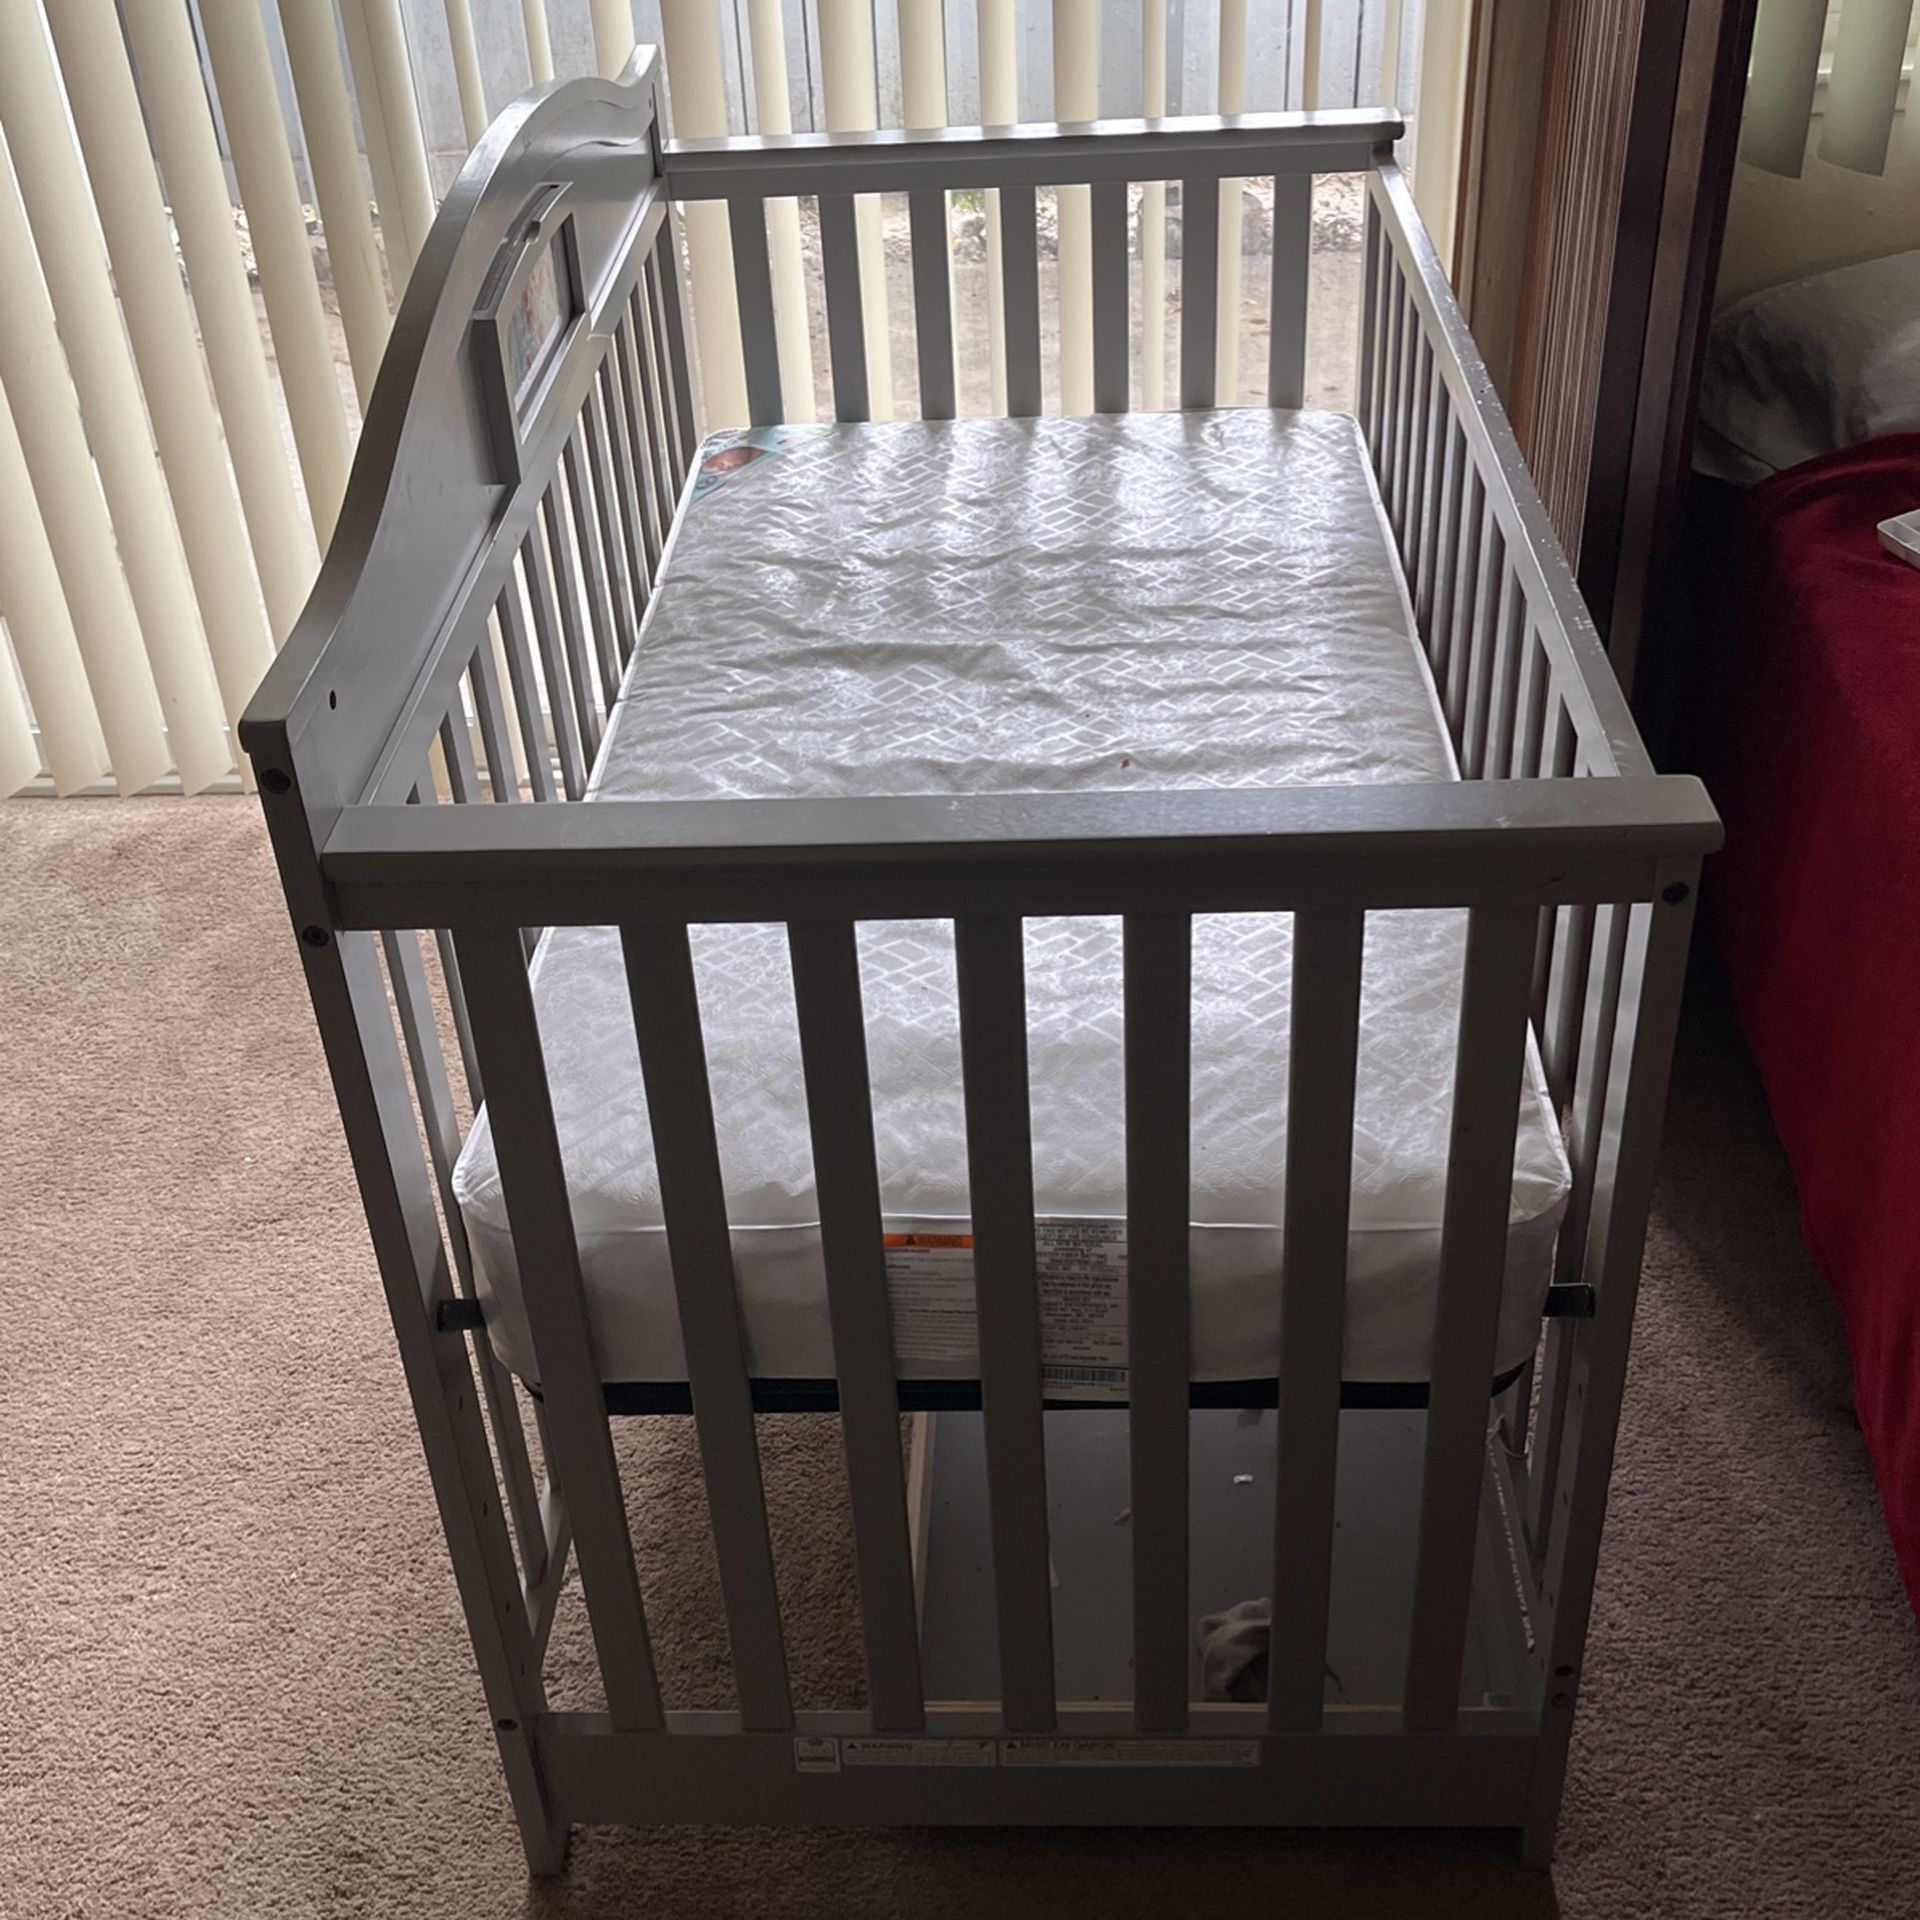 Baby crib that turns into a toddler bed